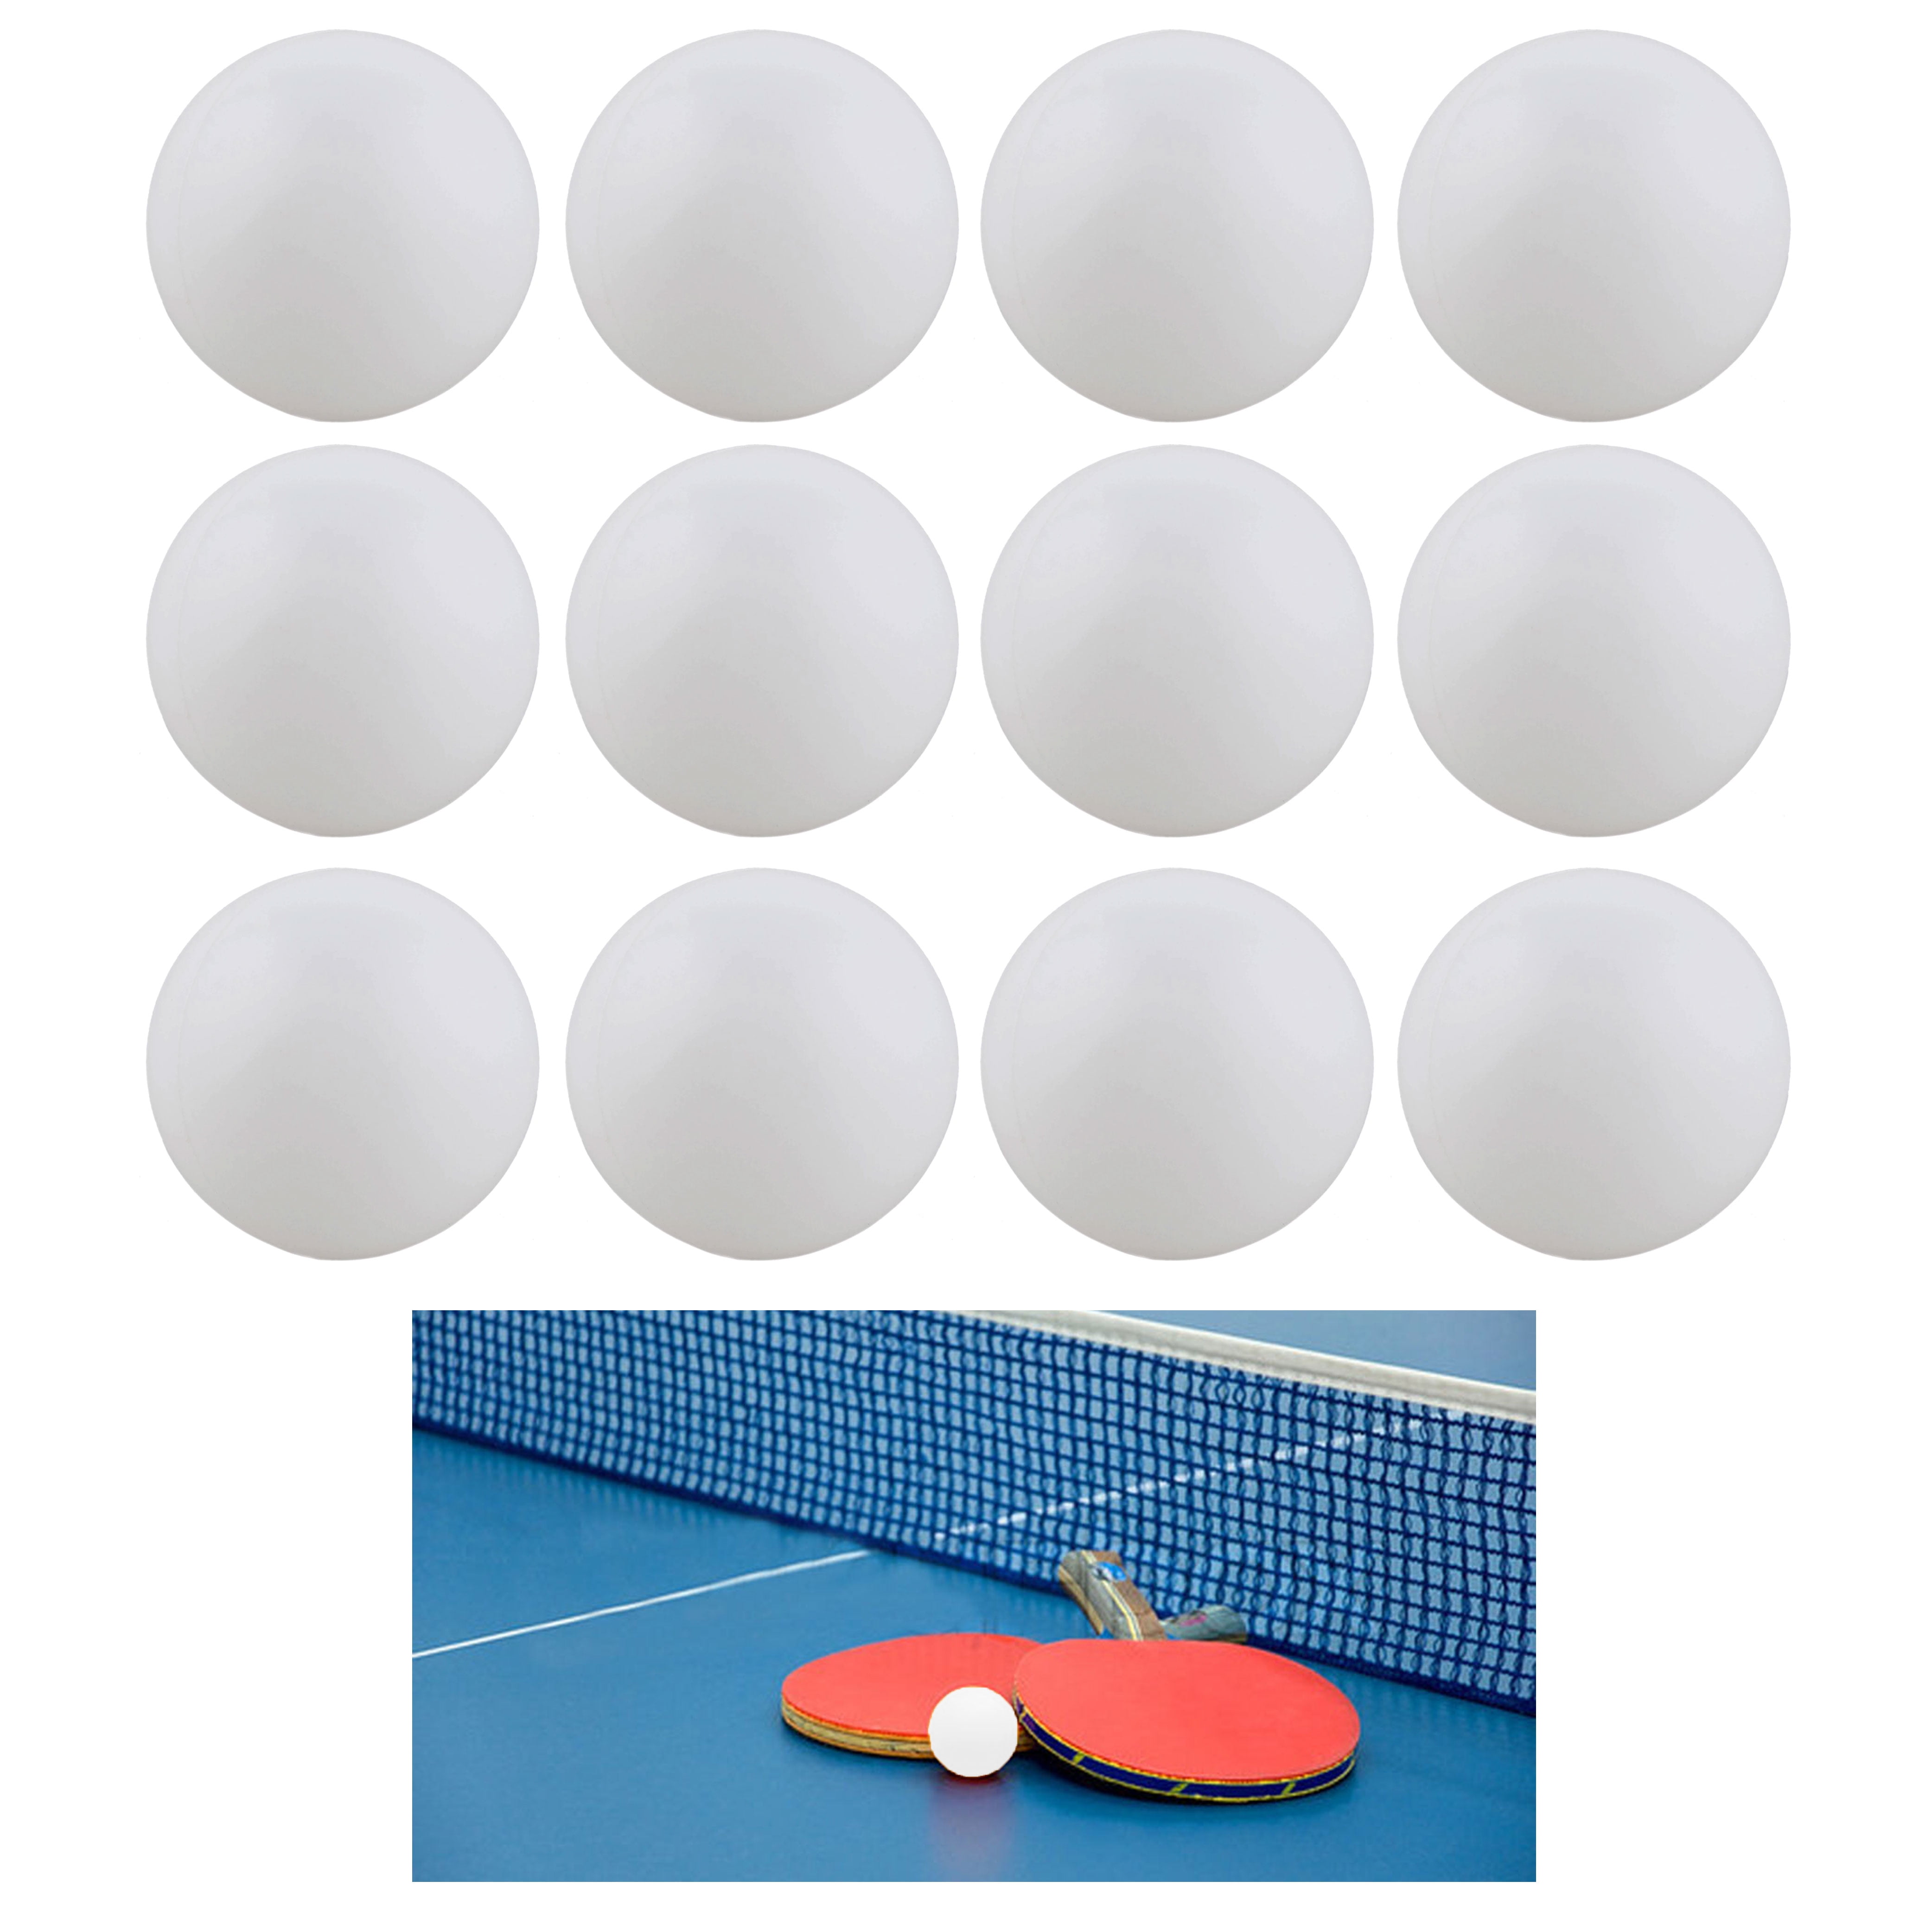 36 NEW PRACTICE PING PONG BALLS TABLE TENNIS BEER PONG BALL 